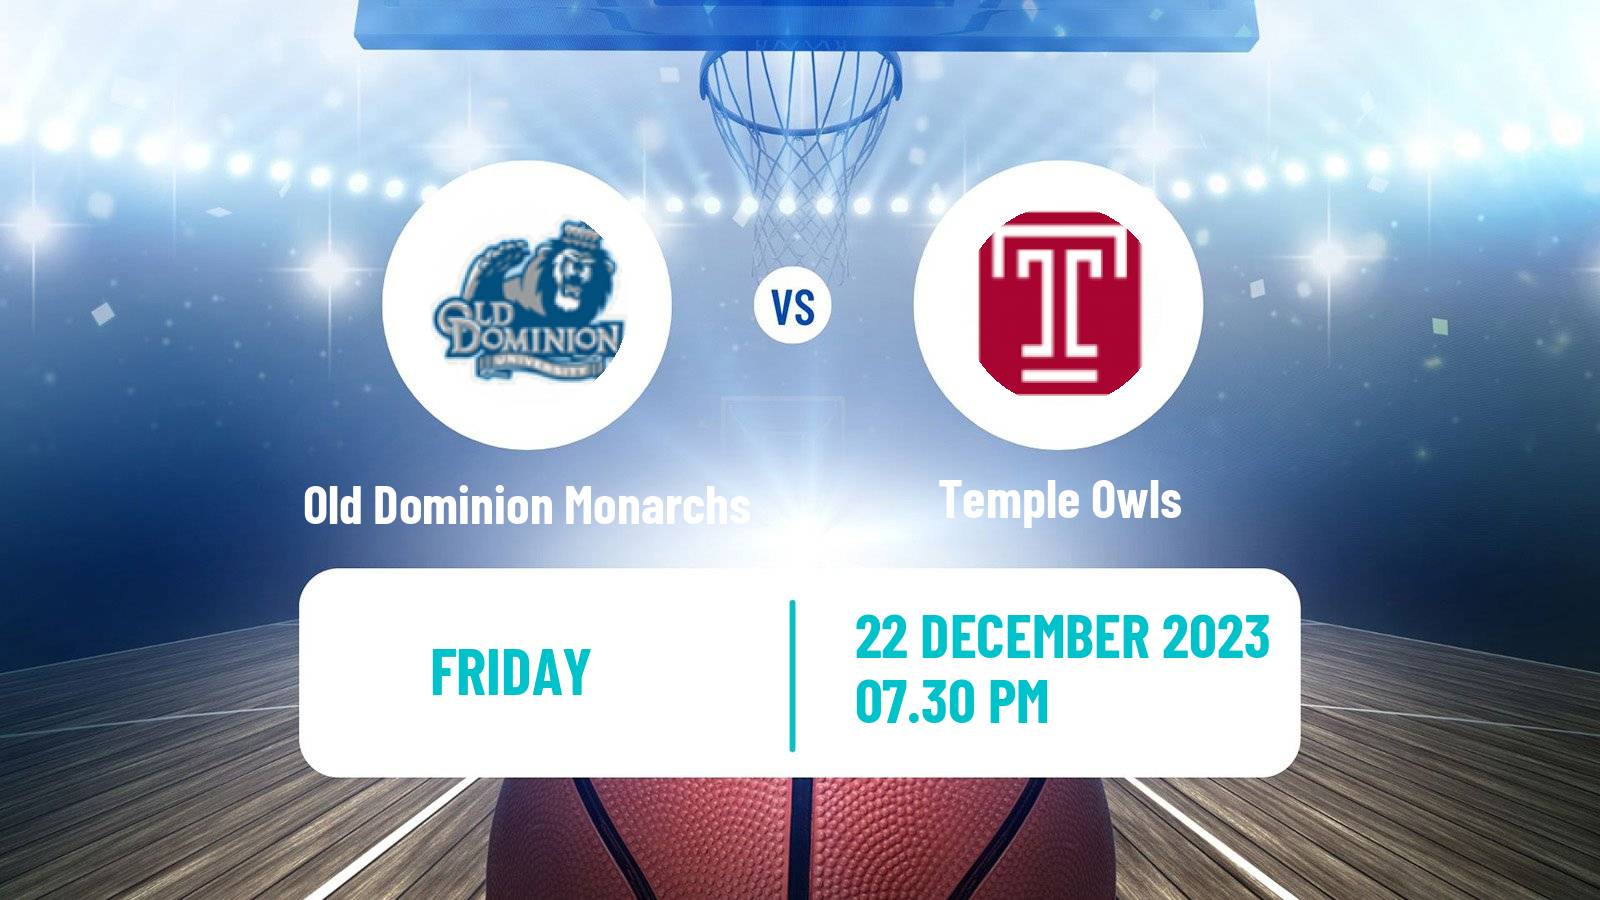 Basketball NCAA College Basketball Old Dominion Monarchs - Temple Owls